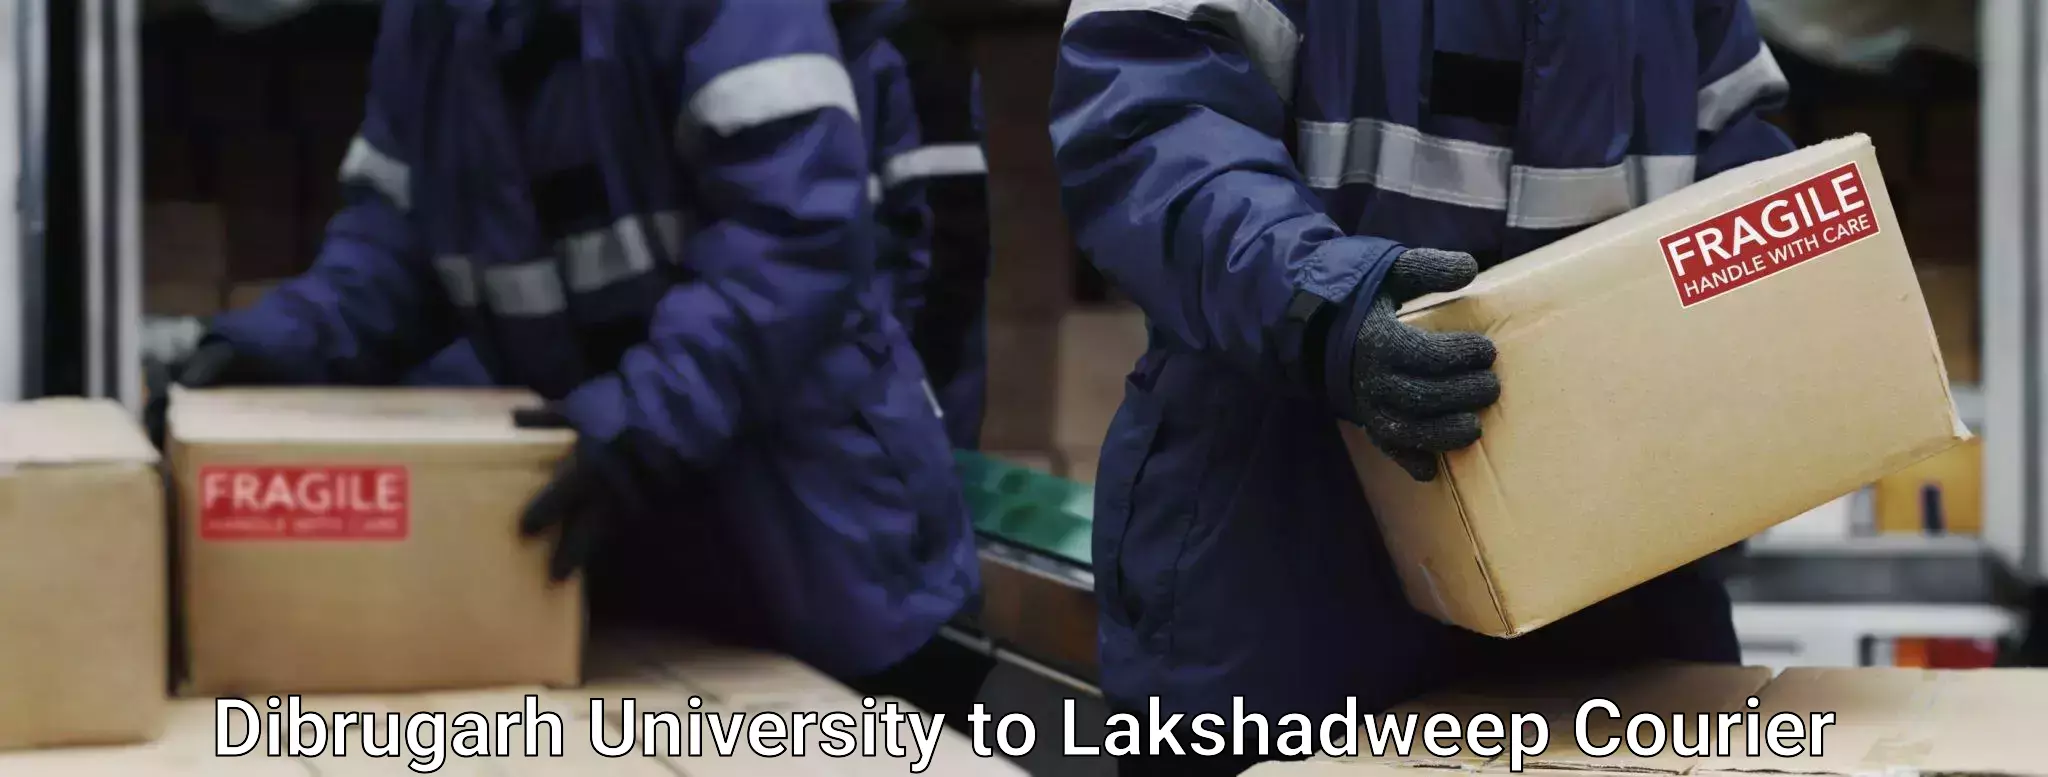 Safe luggage delivery Dibrugarh University to Lakshadweep